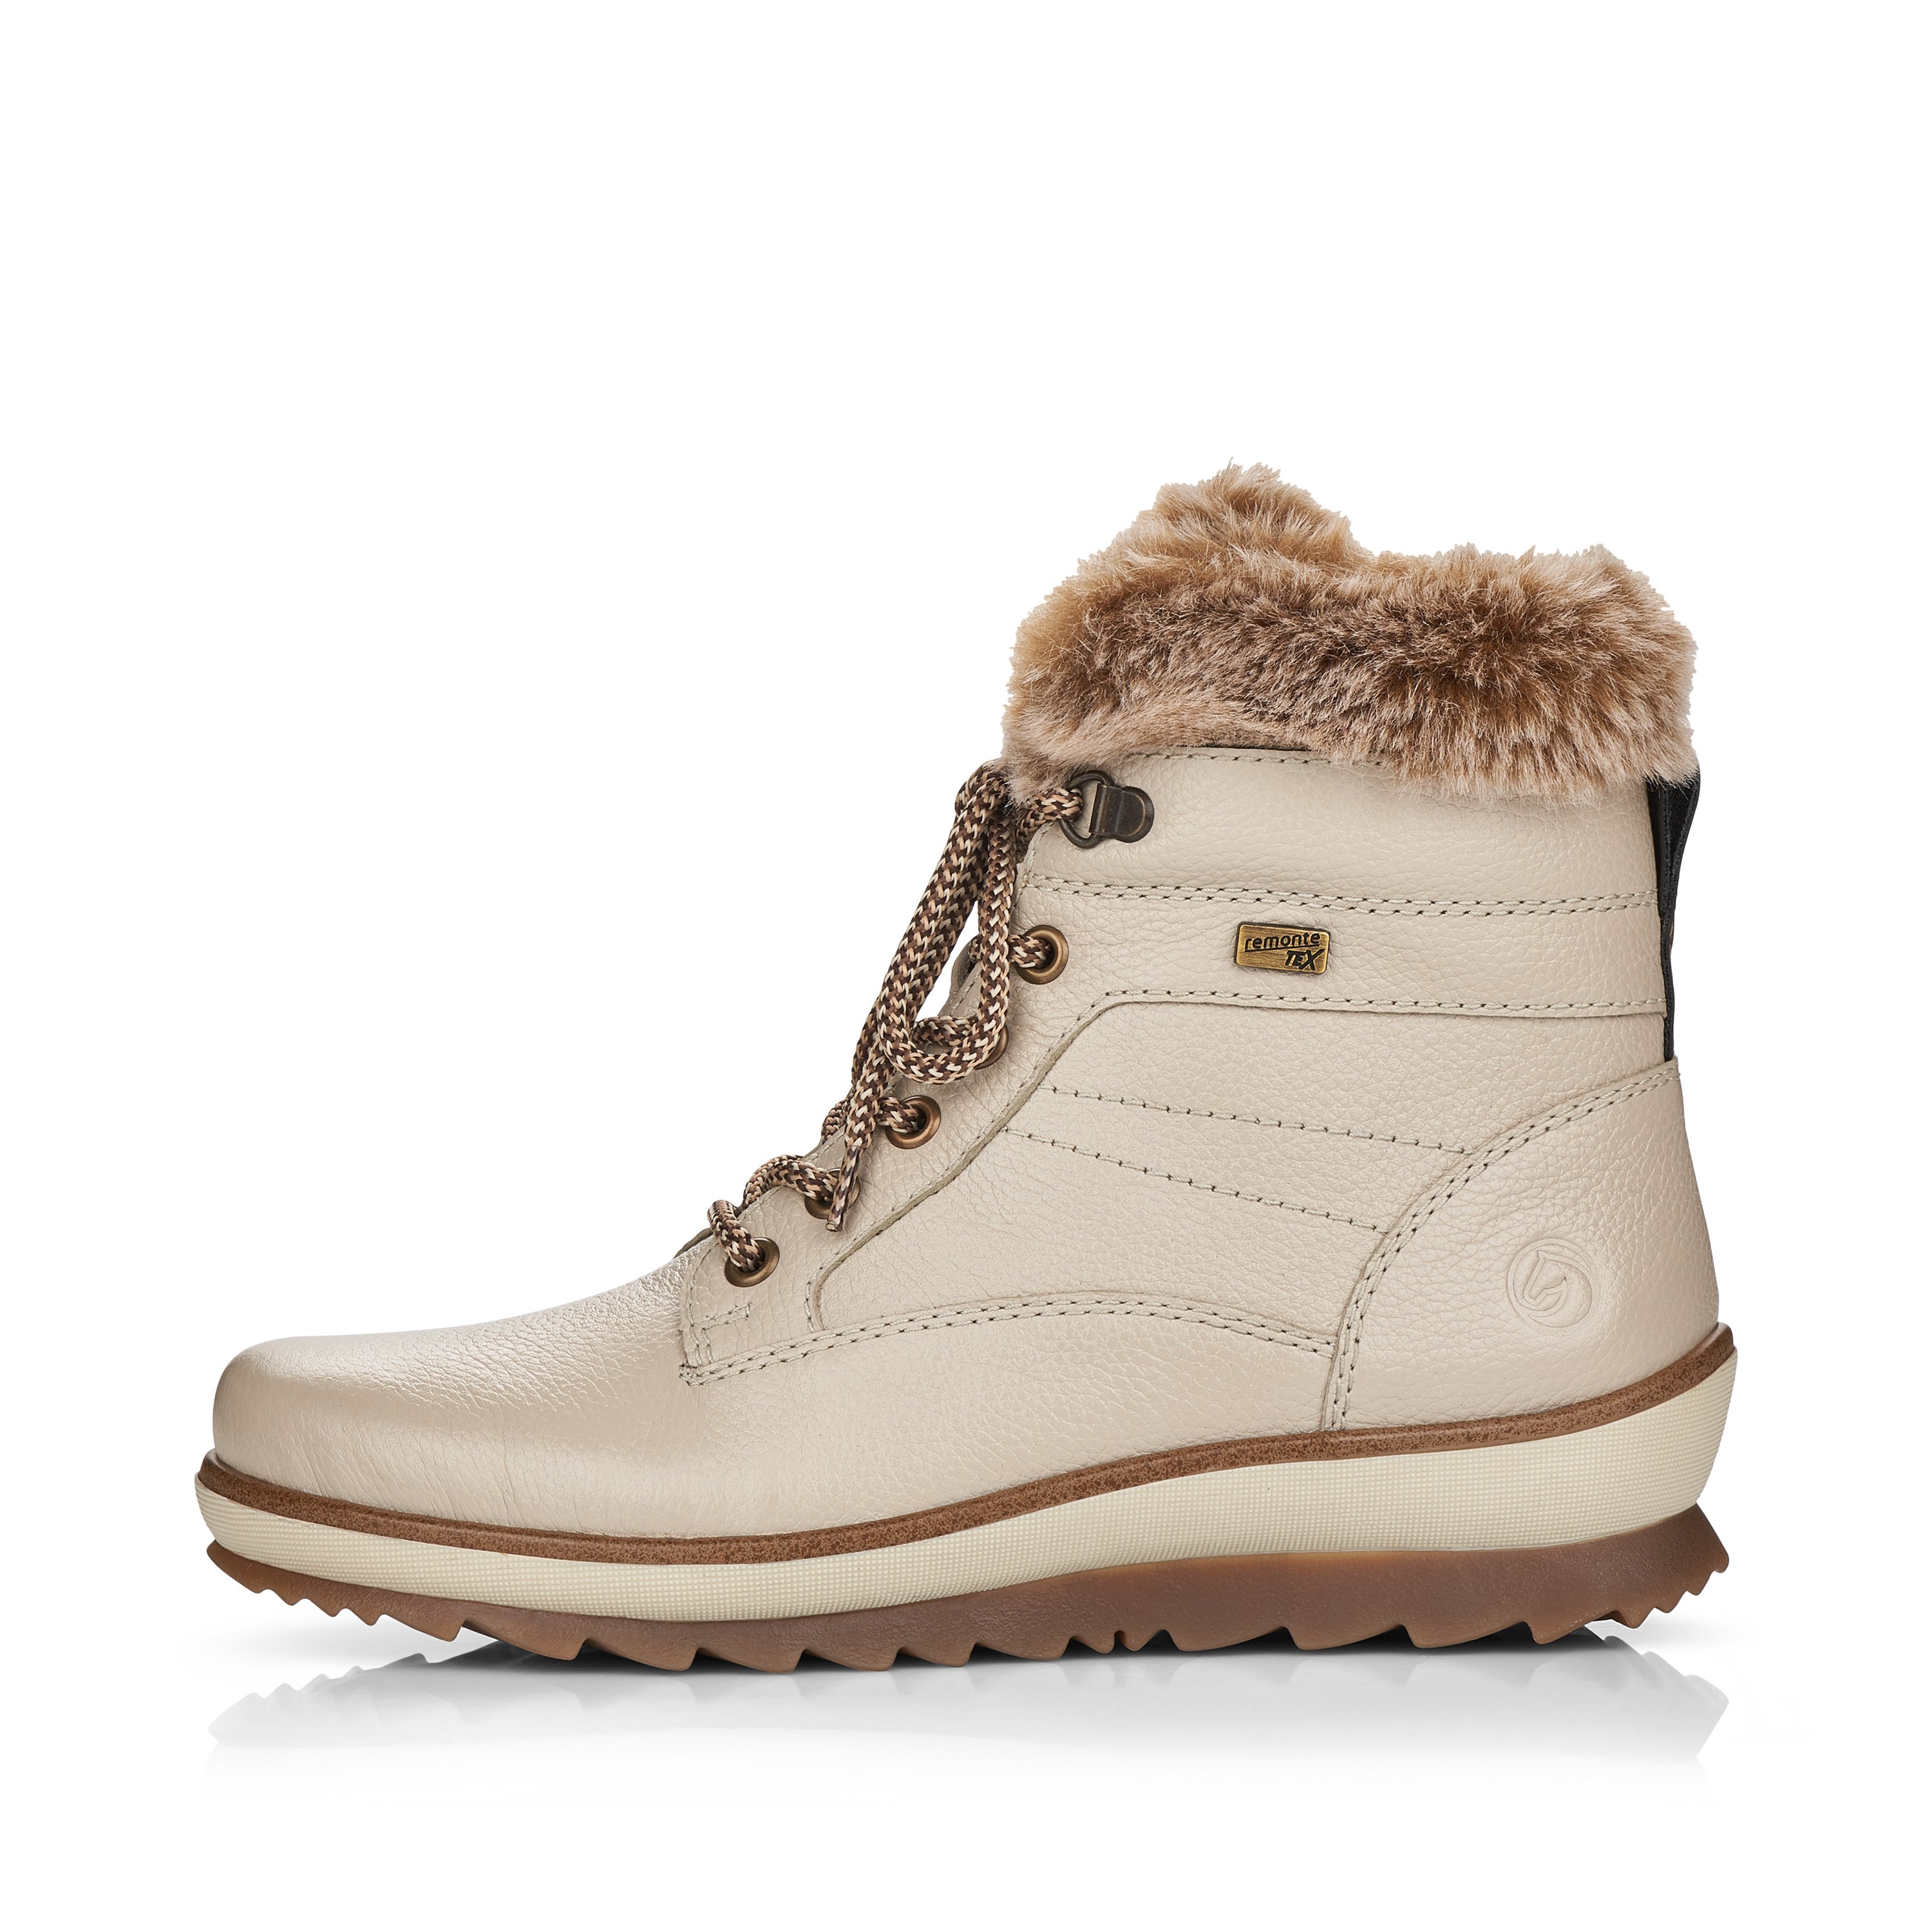 Brown beige remonte women´s lace-up boots R8477-60 with cushioning profile sole. The outside of the shoe